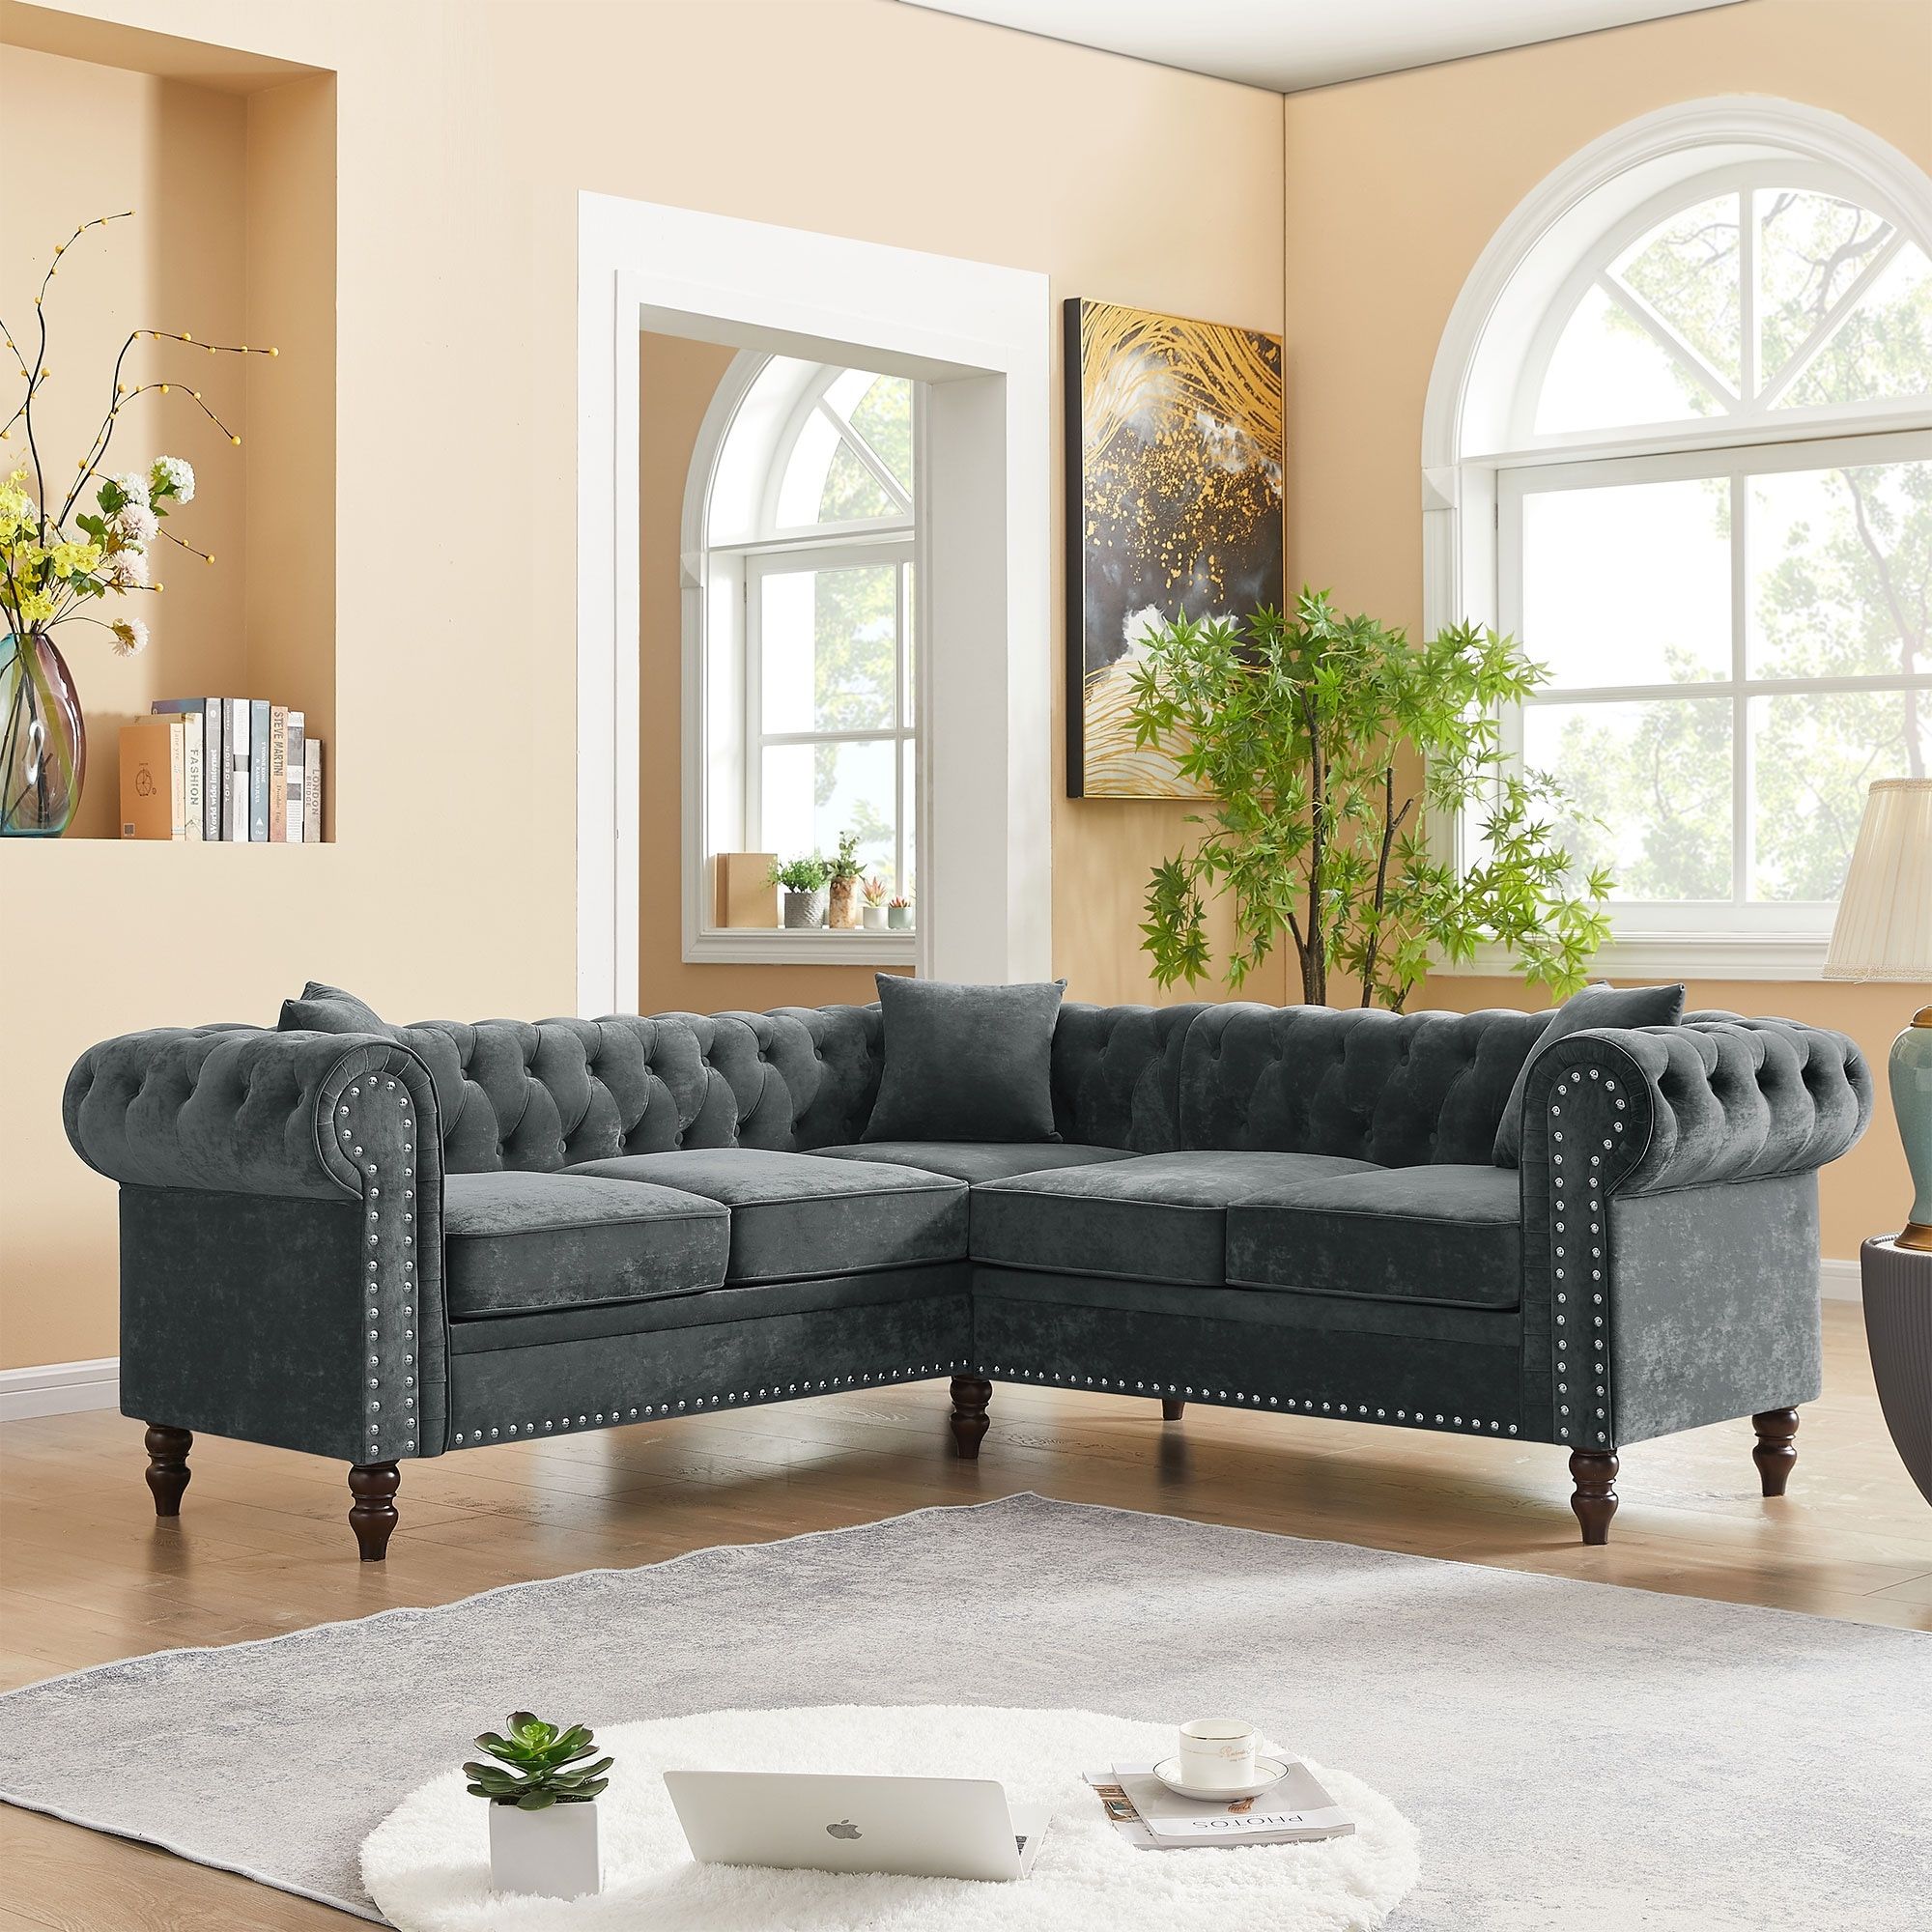 Sofa,l Shaped Sofaa,deep Button Tufted Upholstered, Roll Arm Luxury Classic  Sofa, 3 Pillows Included – Bed Bath & Beyond – 38283618 With Regard To Tufted Upholstered Sofas (Photo 6 of 15)